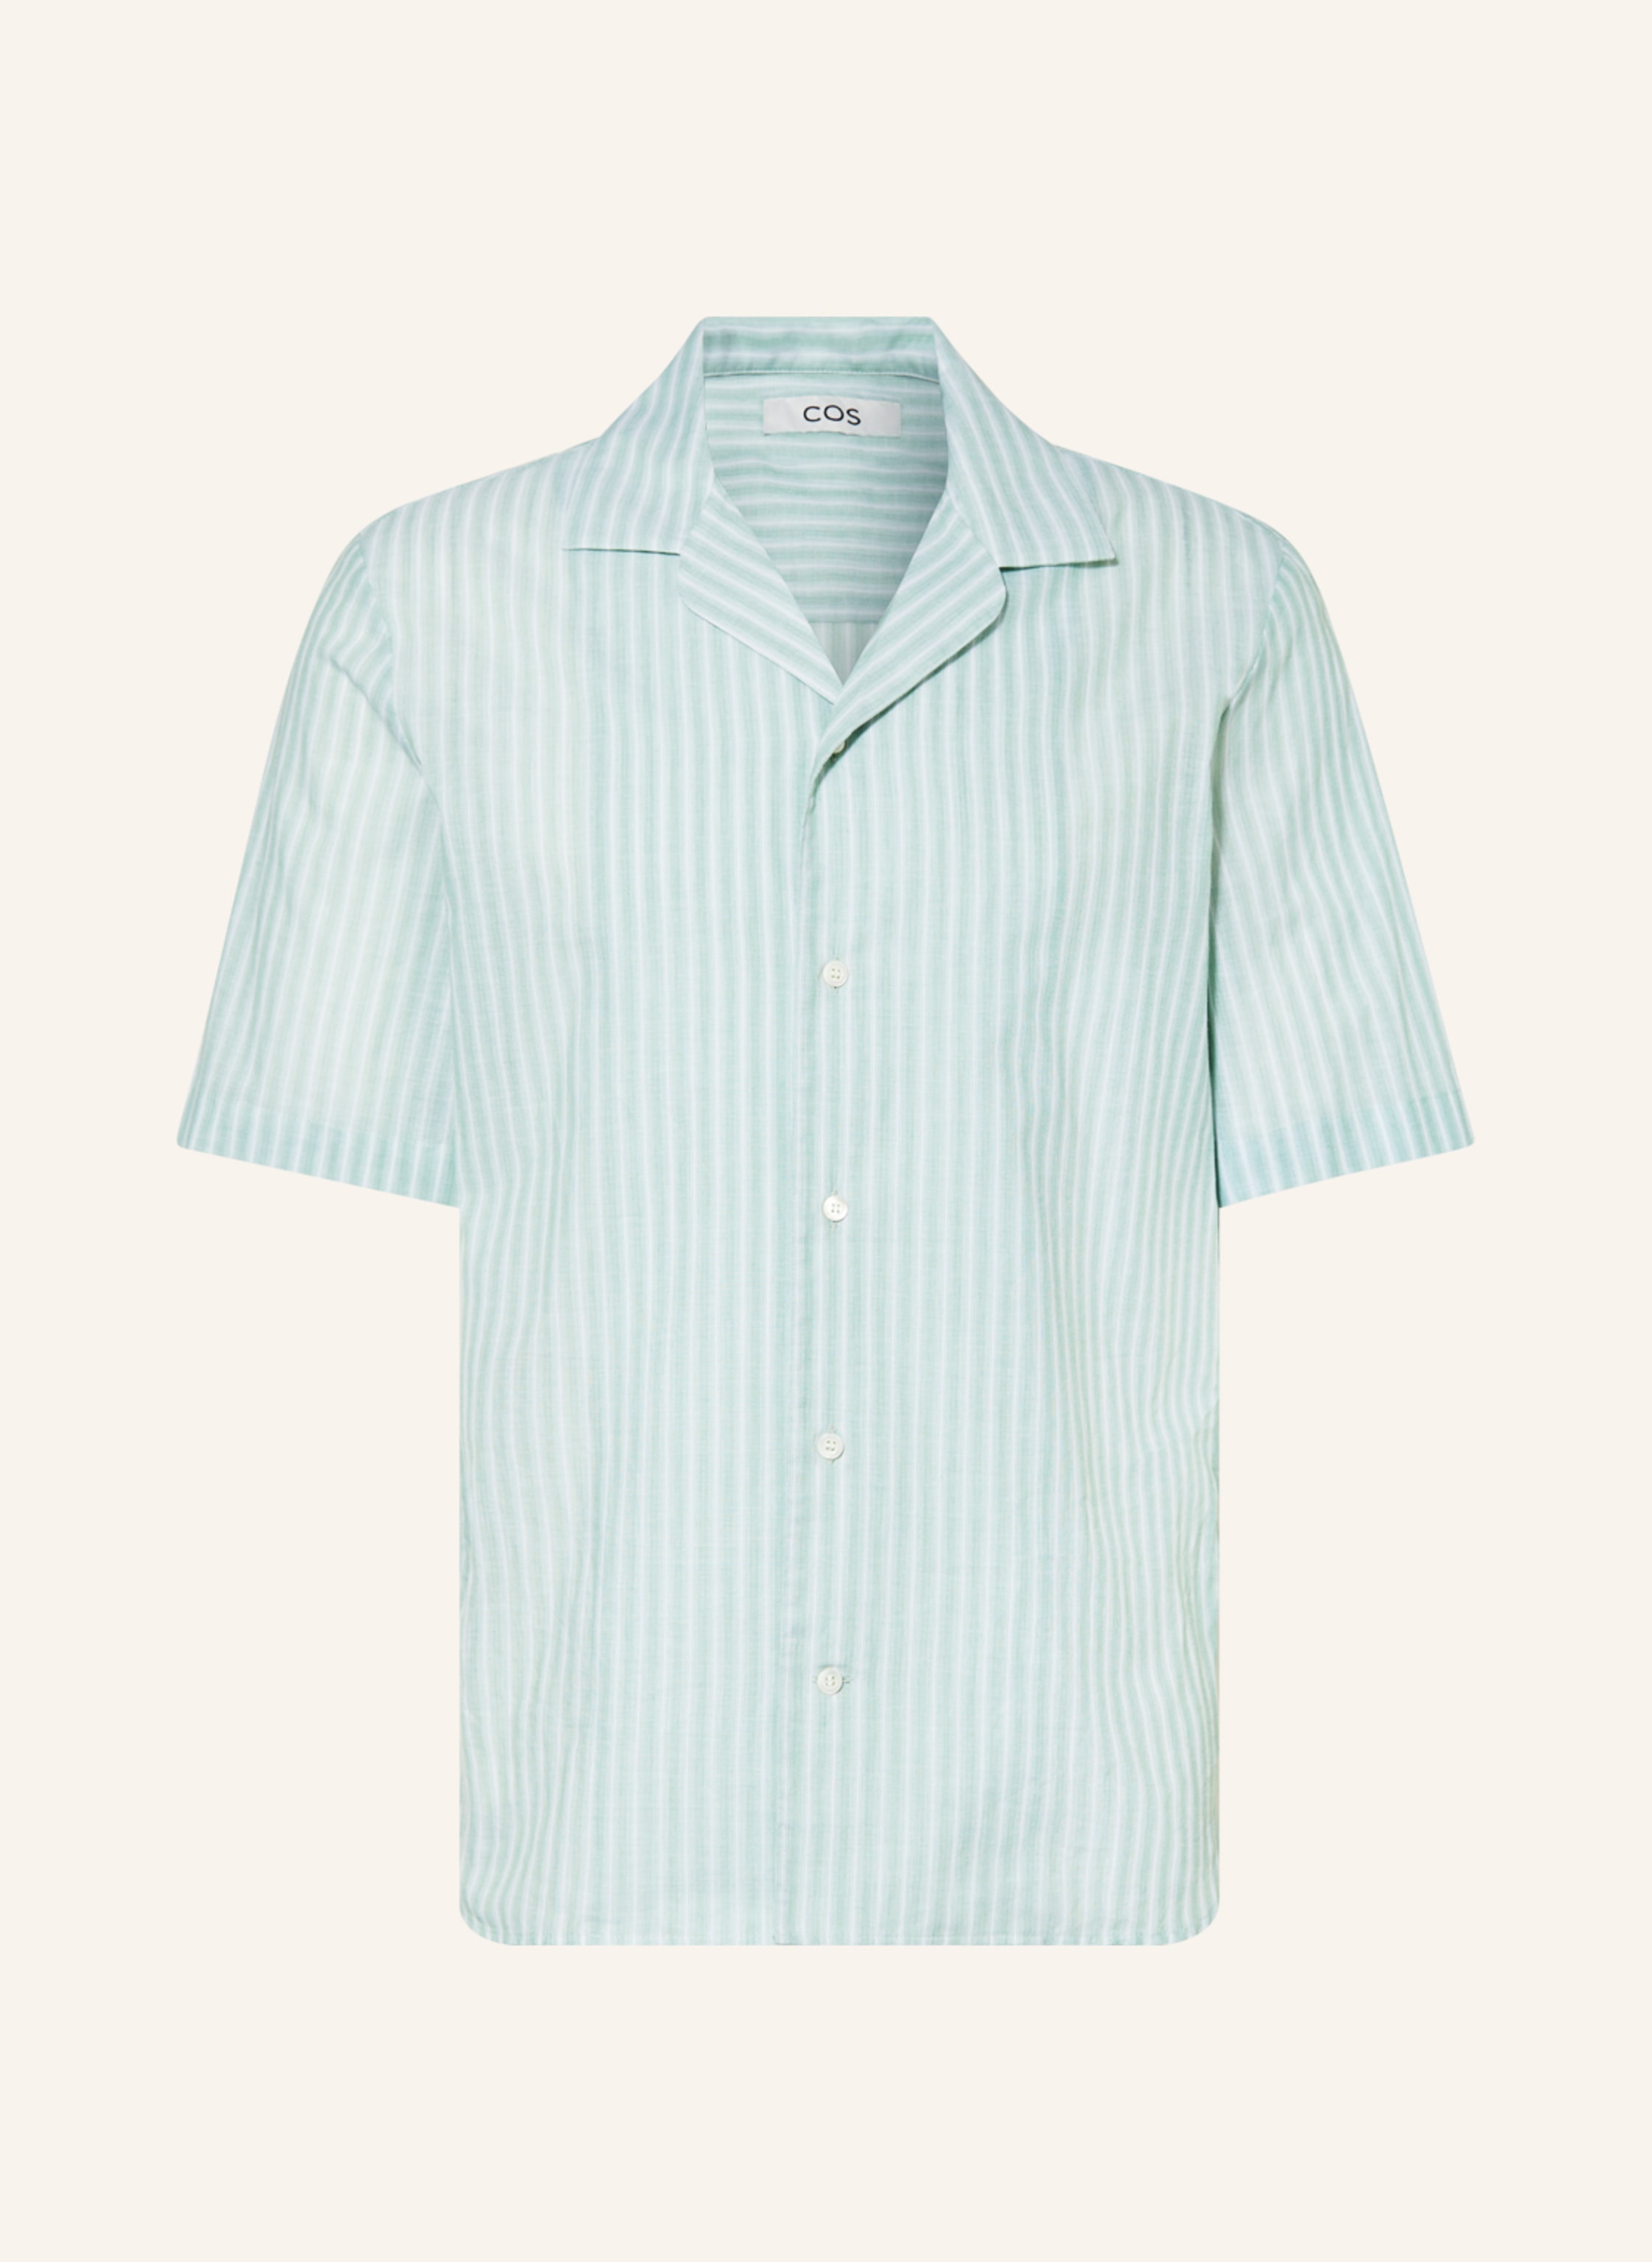 COS Short sleeve shirt relaxed fit in light green/ white